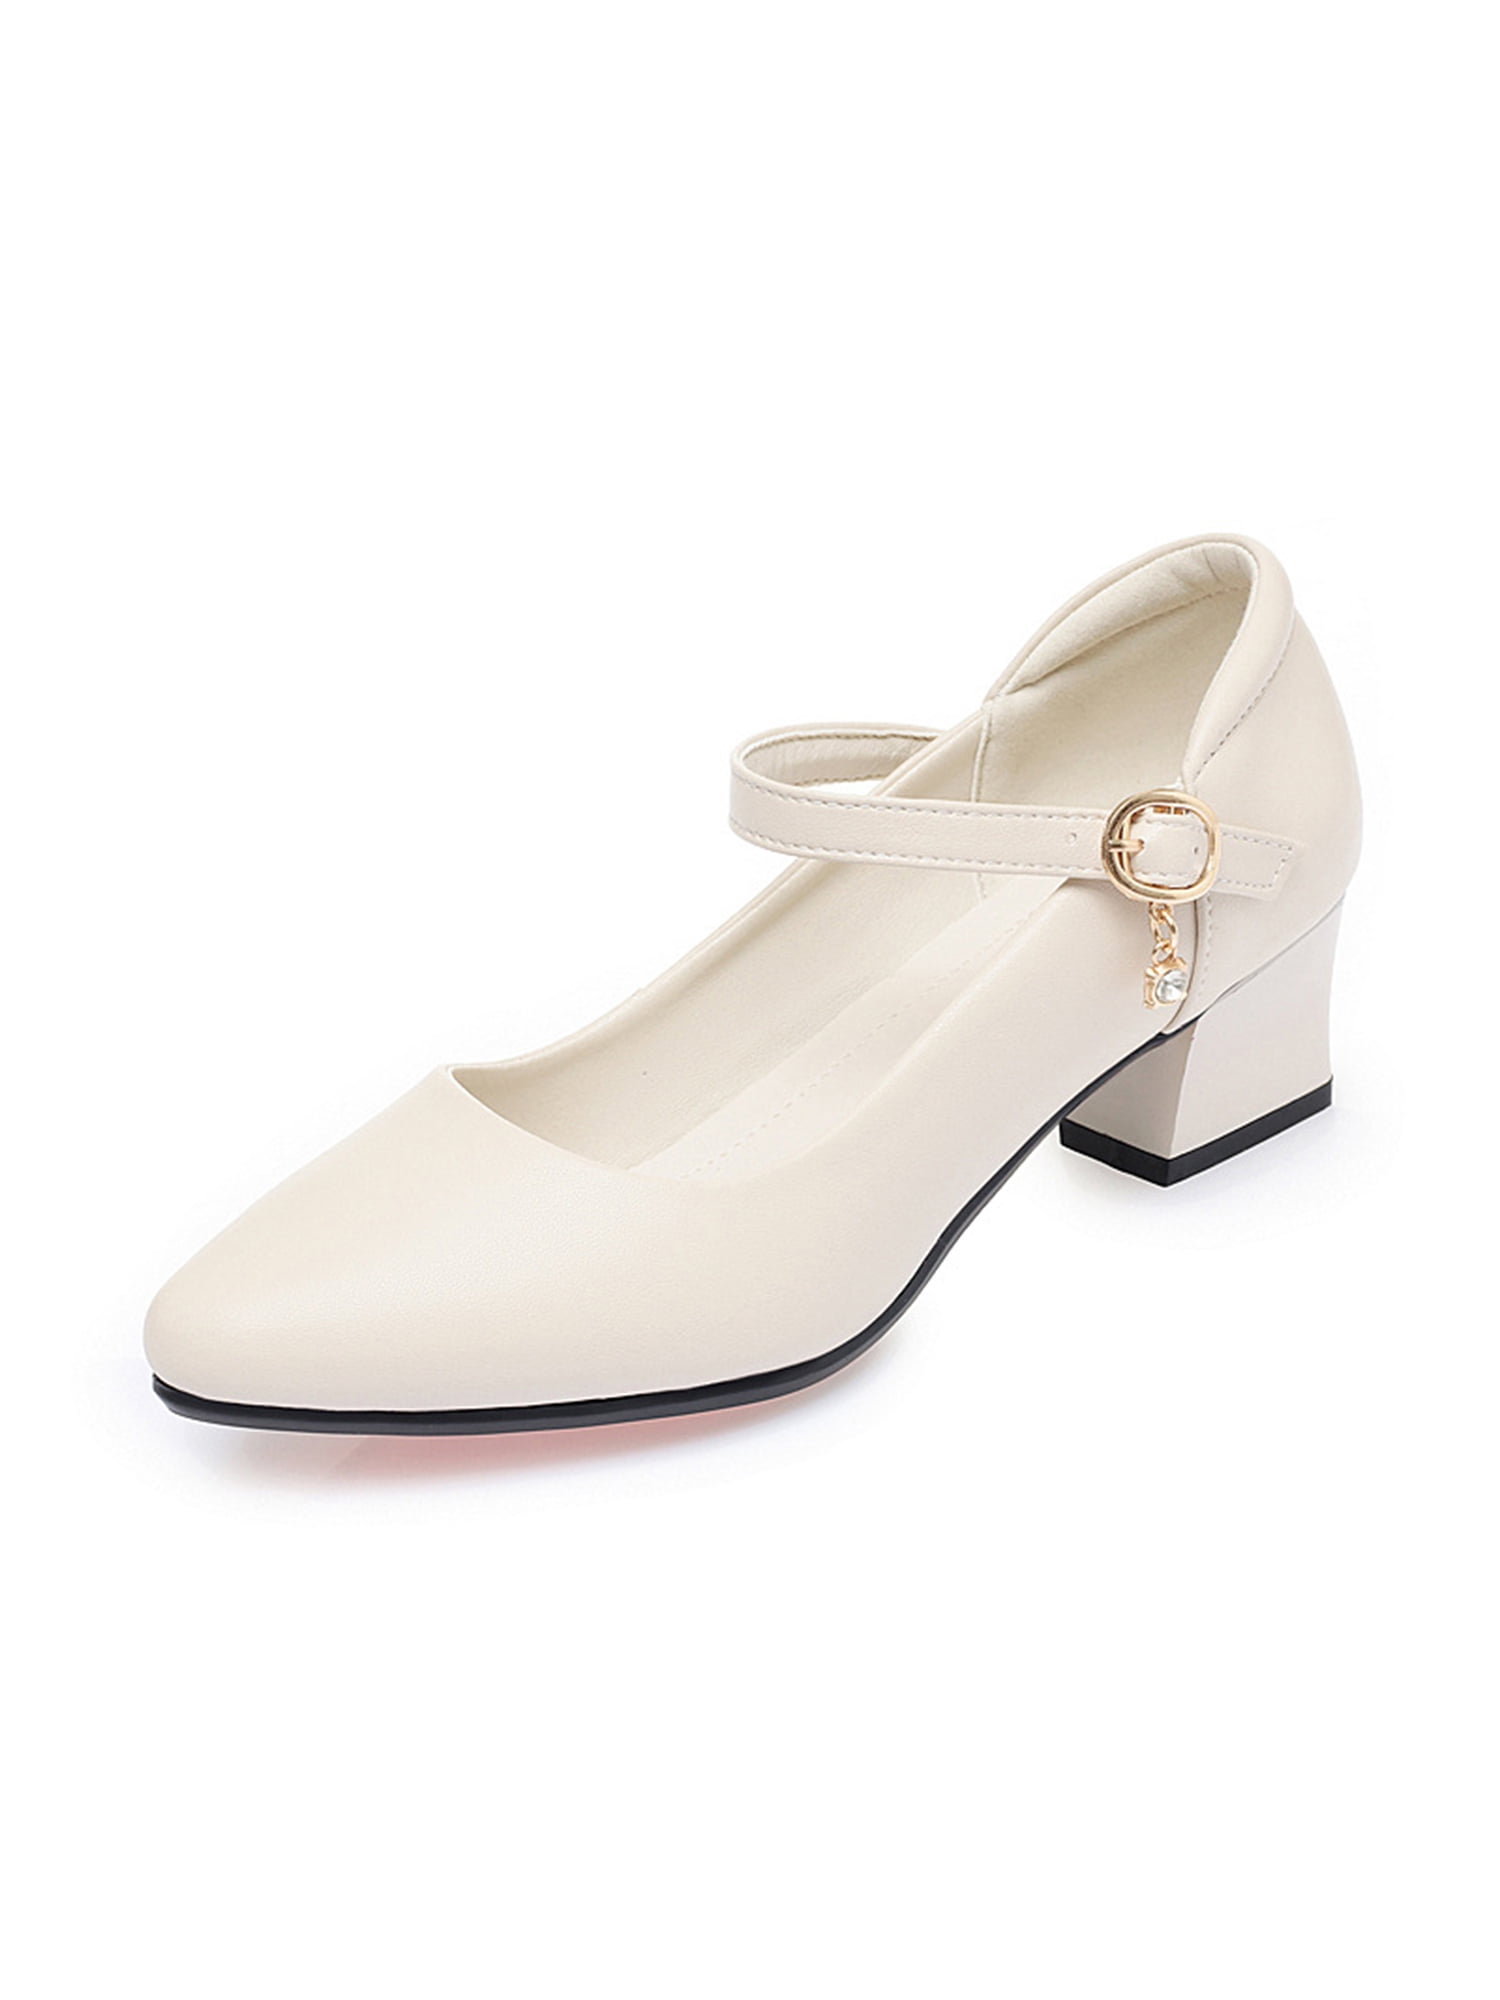 Ladies Small Size Mary Jane High Heel Pumps SS80 - AstarShoes